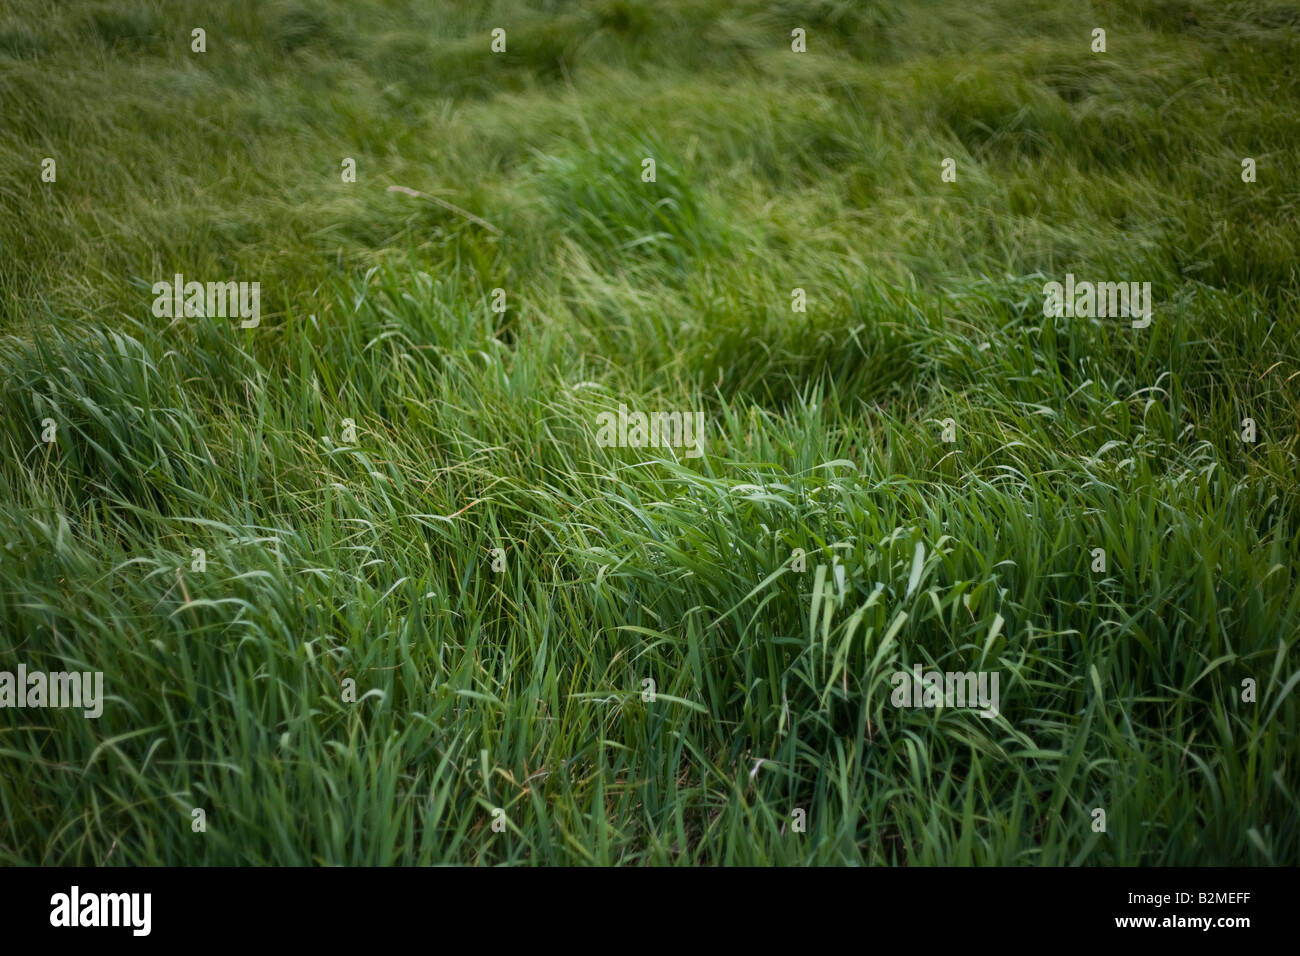 Field of tall green grass flowing in the wind. Stock Photo